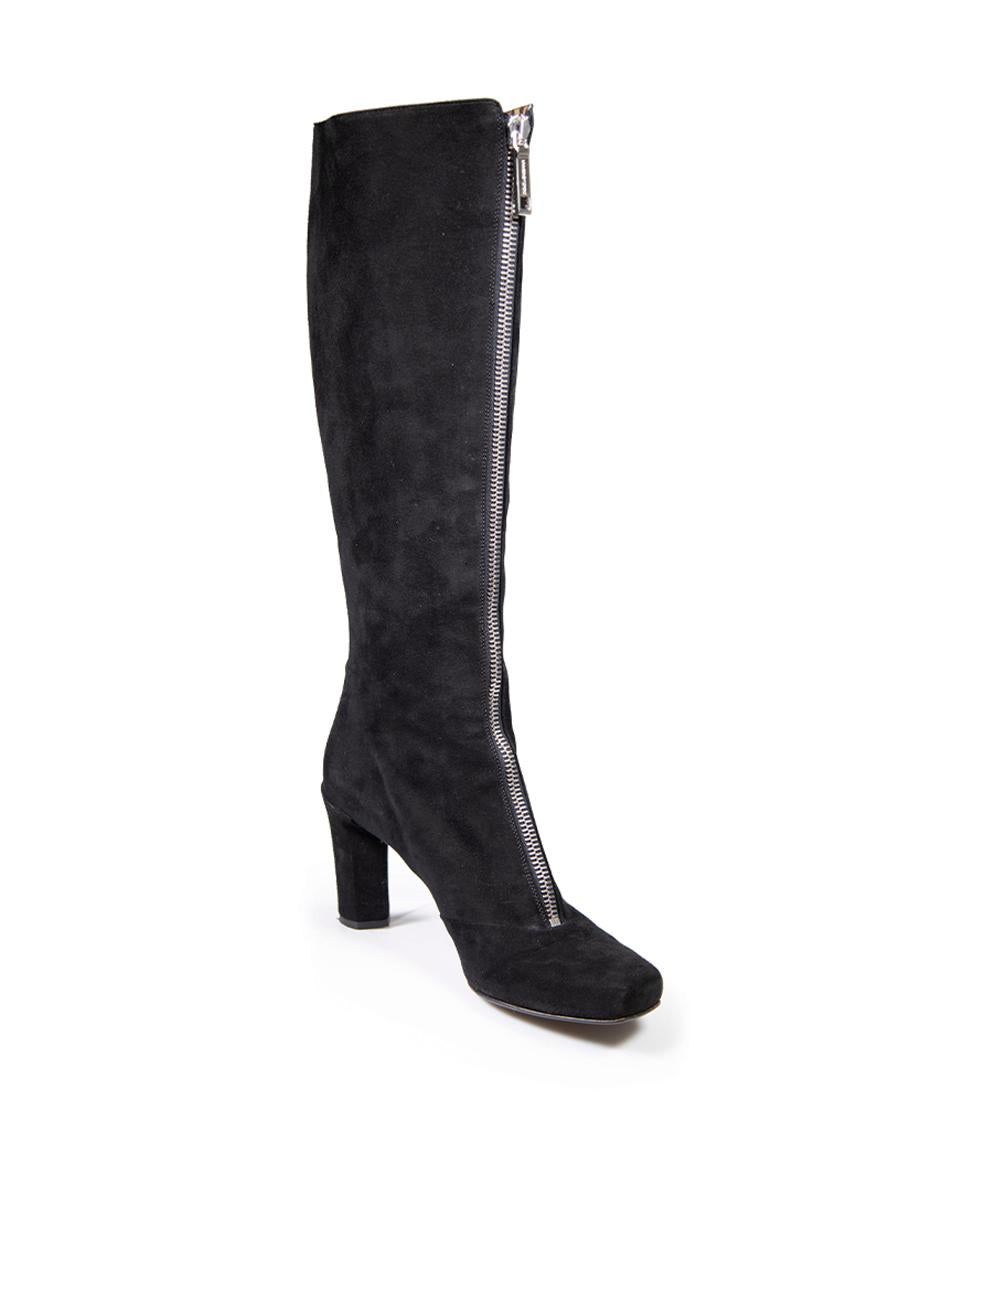 CONDITION is Good. Minor wear to boots is evident. Light wear to both boot heels and the left boot toe with abrasions to the suede. The right boot heel has peeling to the suede on this used Dolce & Gabbana designer resale item.
 
 
 
 Details
 
 
